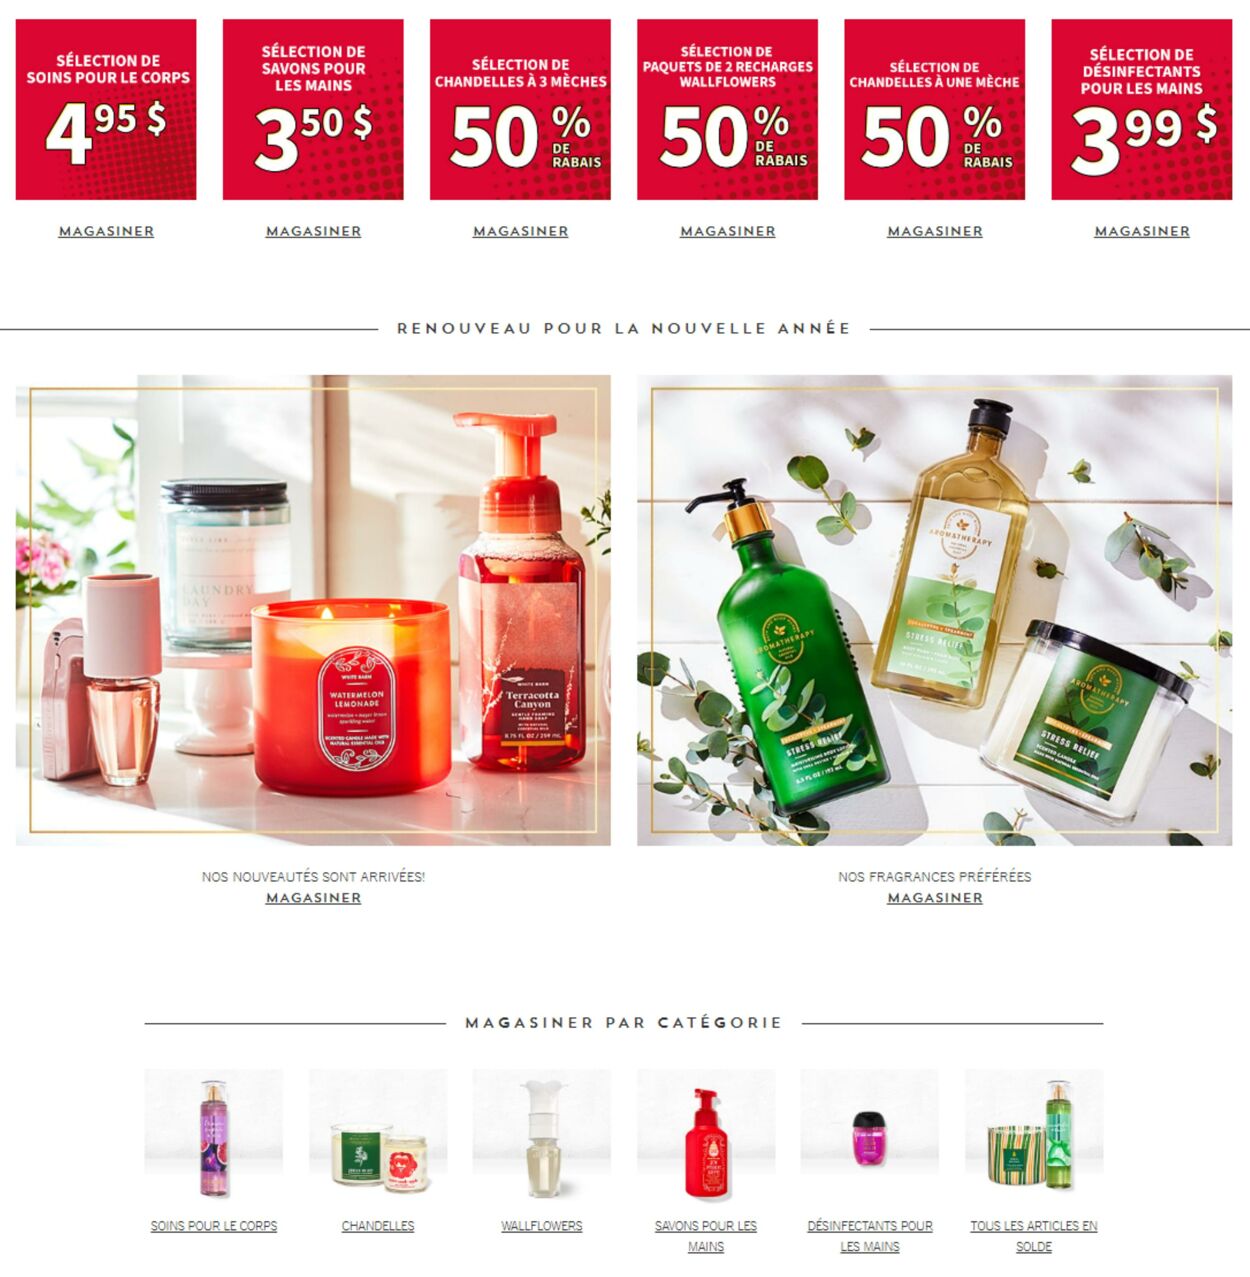 Circulaire Bath & Body Works 07.03.2023 - 20.03.2023